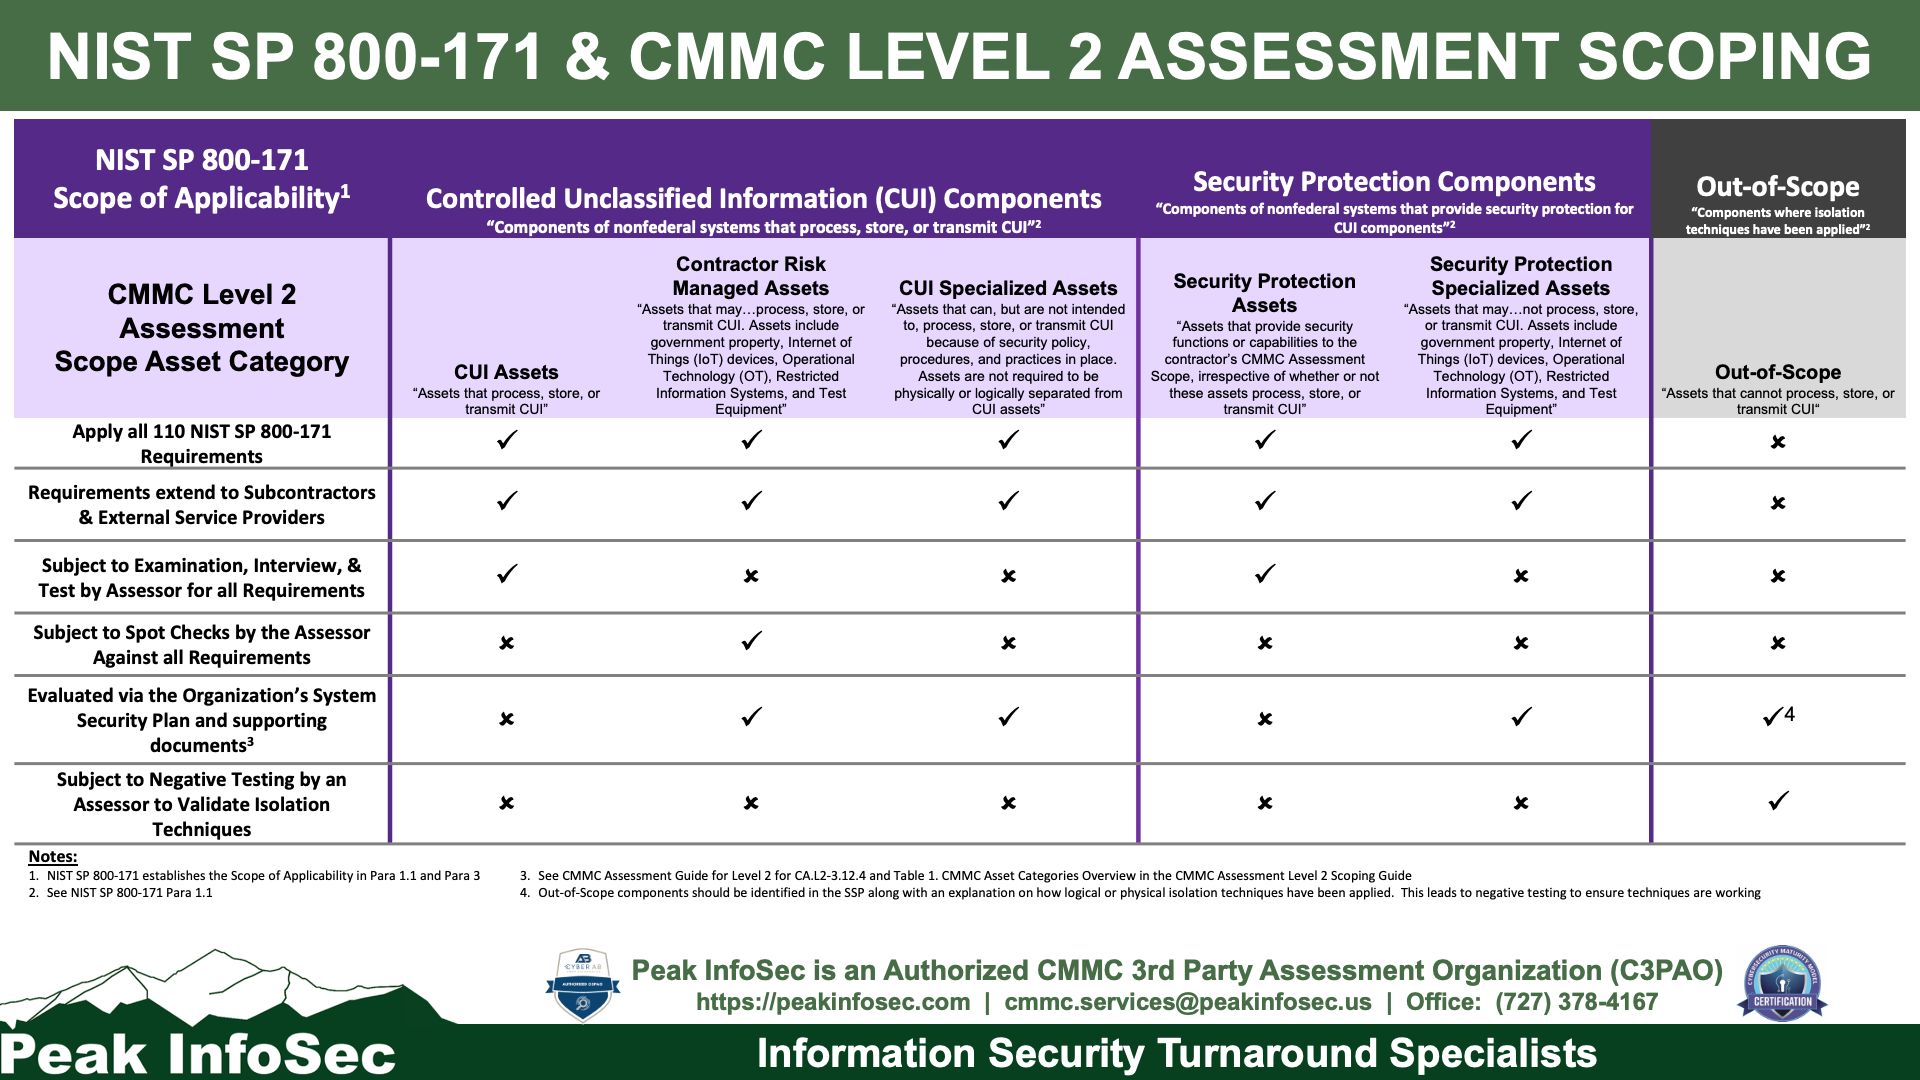 NIST SP 800 171 and CMMC Level 2 Assessment Scoping Infographic